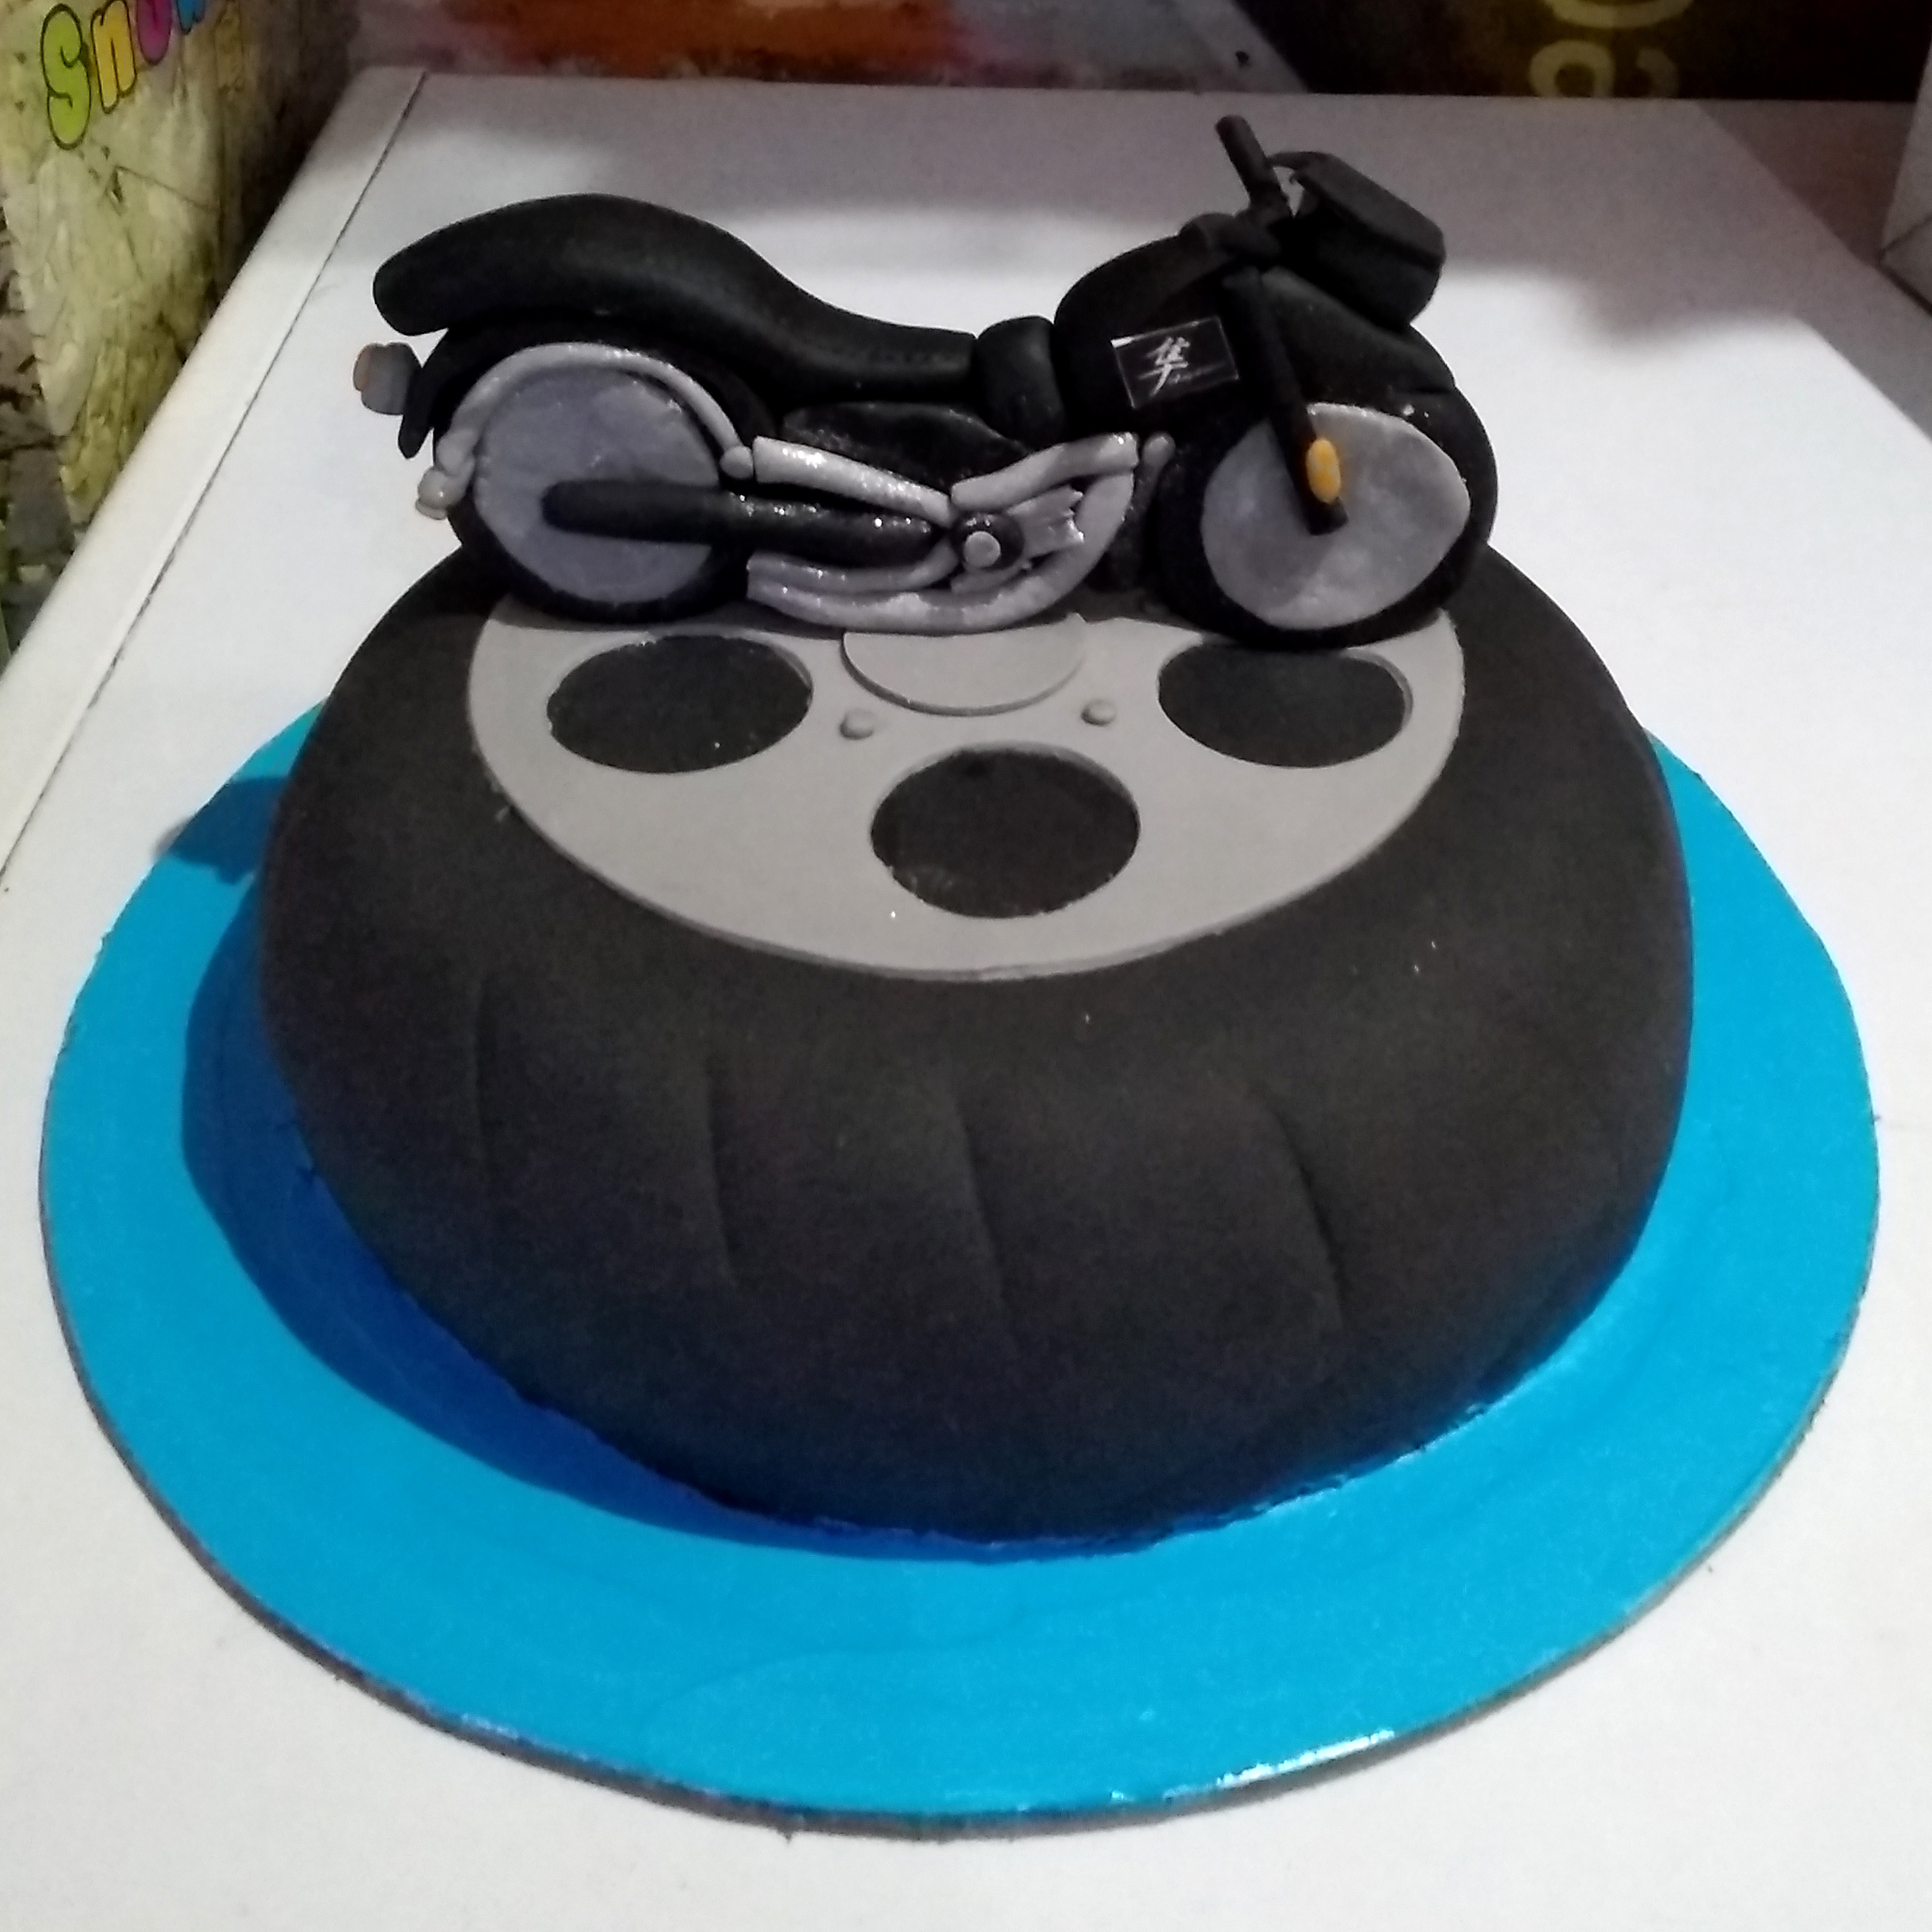 Buy online egg-less Bicycle Theme Cake